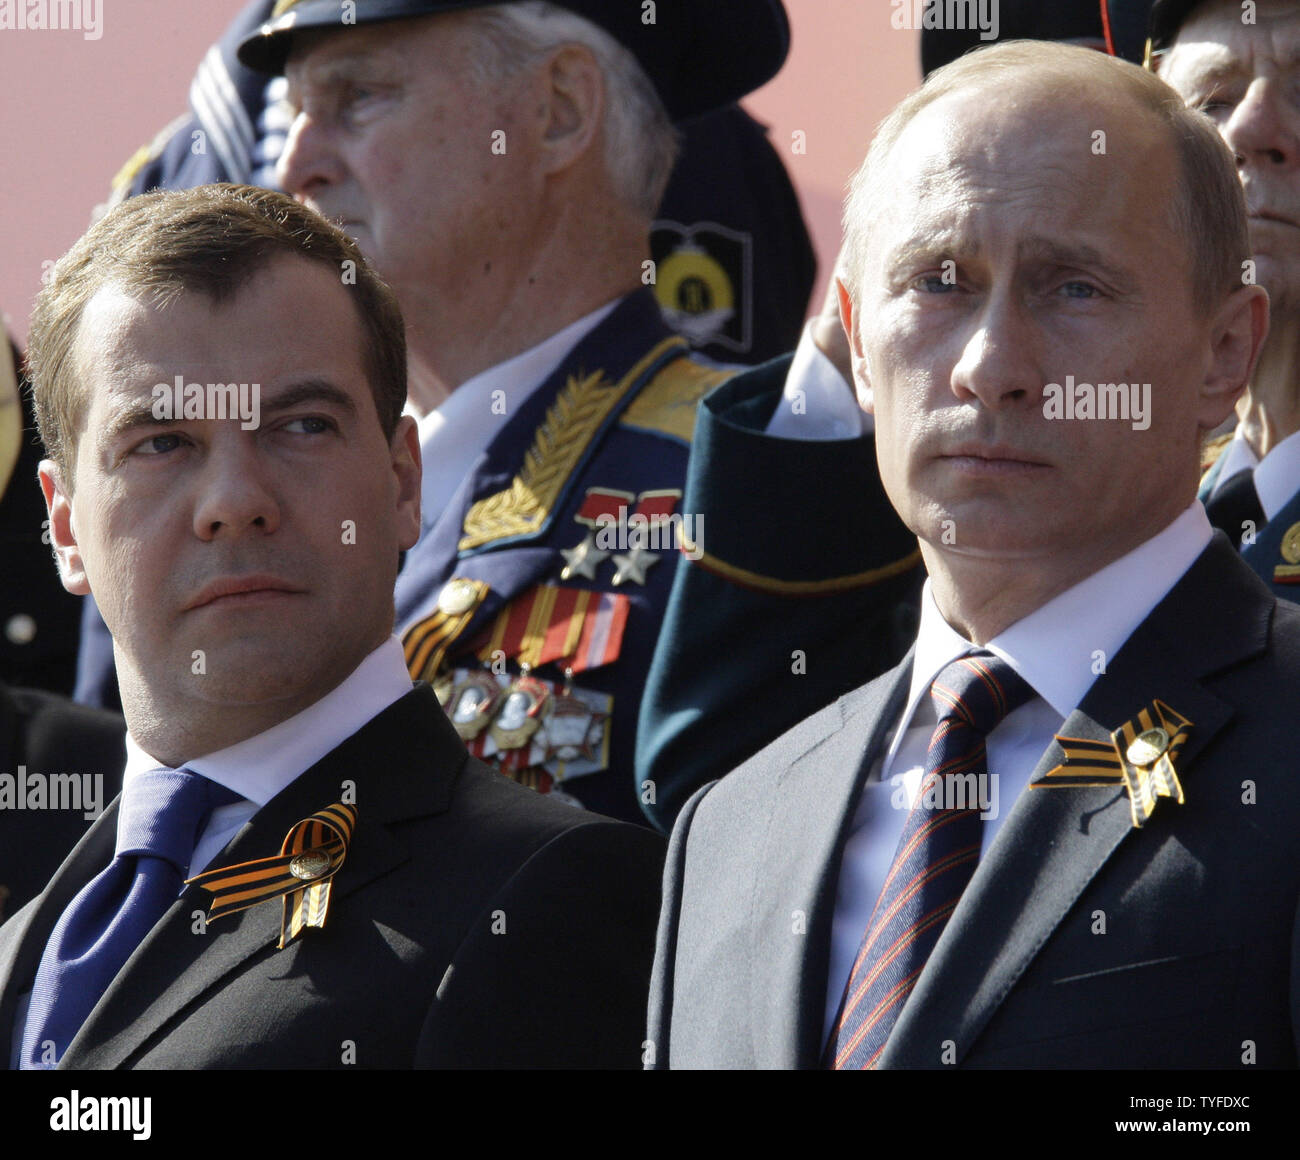 Russian President Dmitry Medvedev (L) and Prime Minister Vladimir Putin attend  the Victory Day military parade in Red Square in Moscow on May 9, 2009. Today Russia celebrates the 64th anniversary of the World War Two victory over Nazi Germany. (UPI Photo/Anatoli Zhdanov) Stock Photo